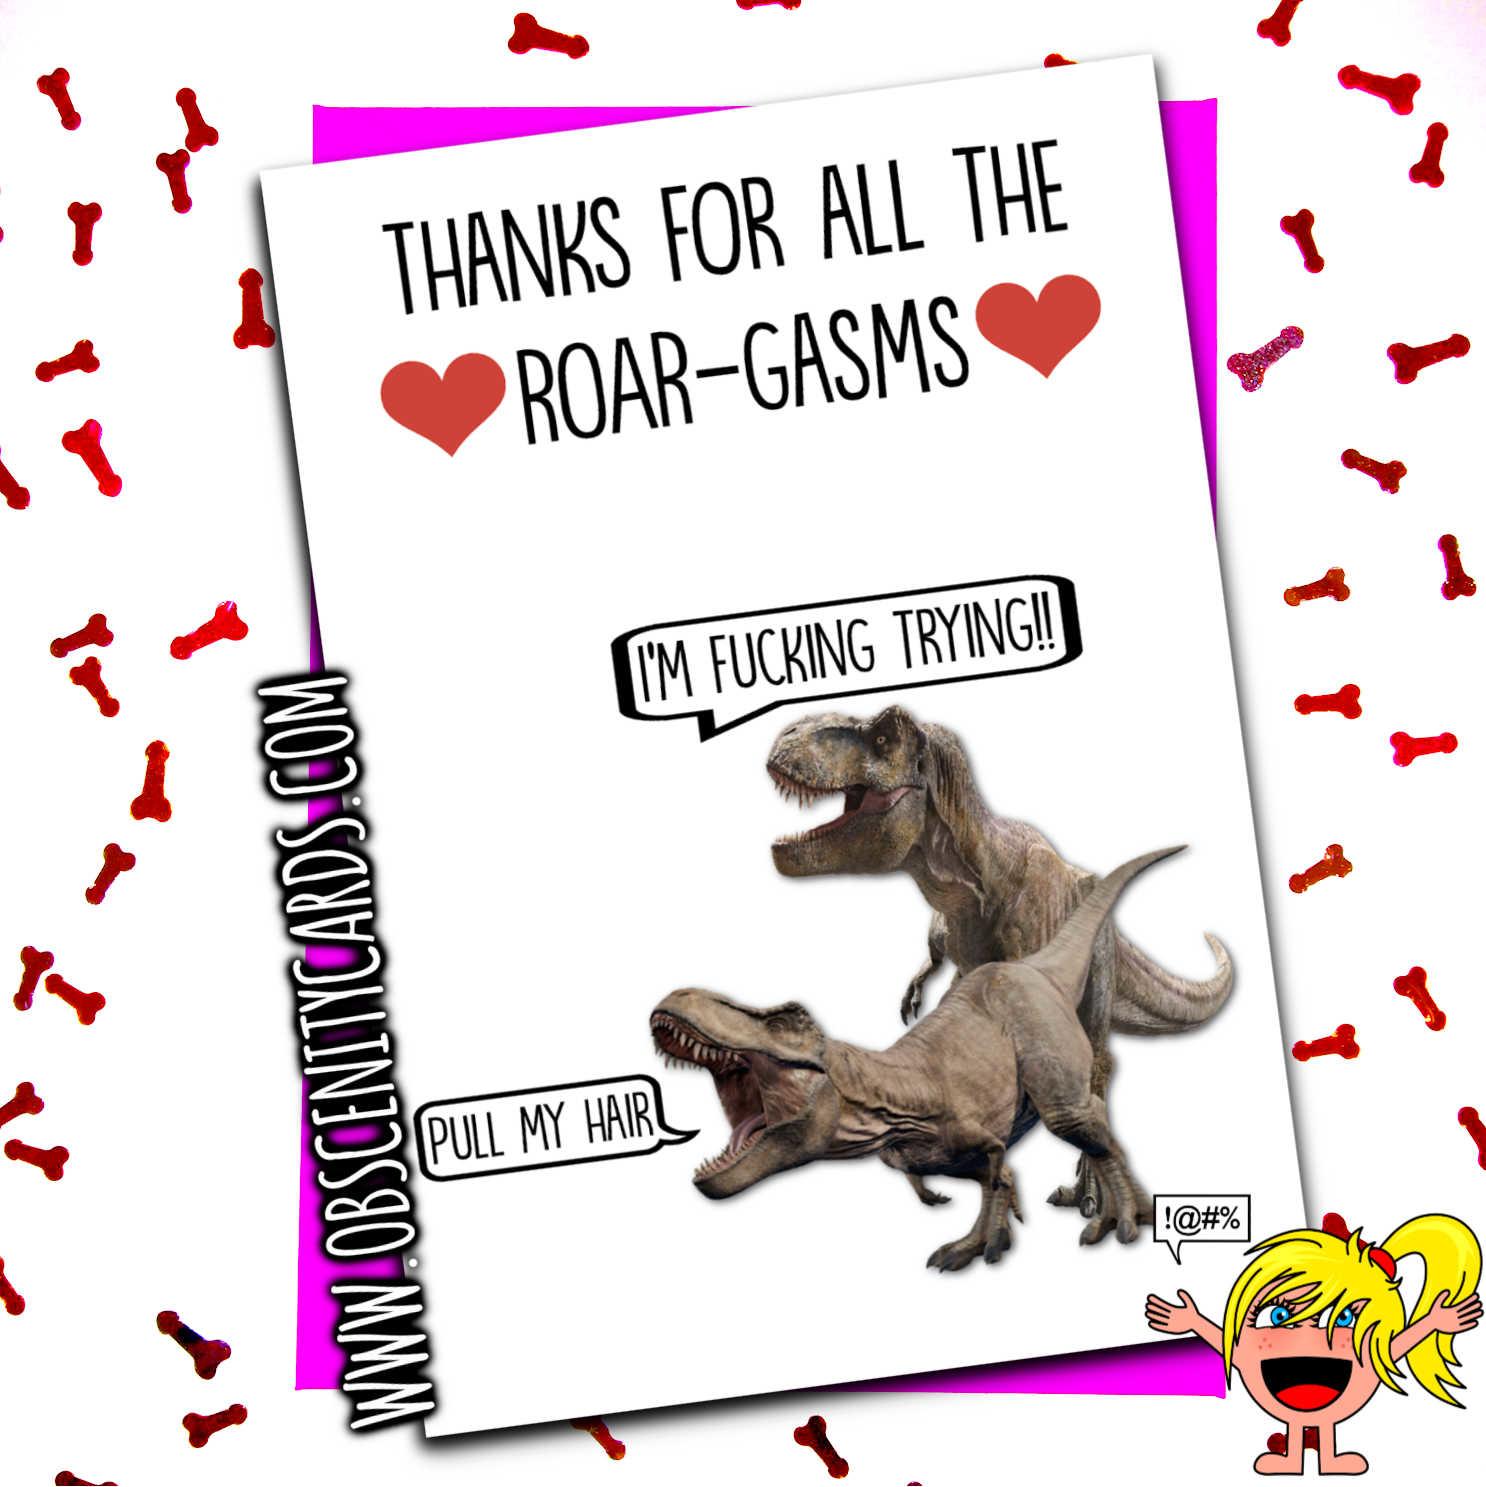 THANKS FOR ALL THE ROAR-GASMS DINOSAUR T-REX FUNNY VALENTINES  ANNIVERSARY CARD